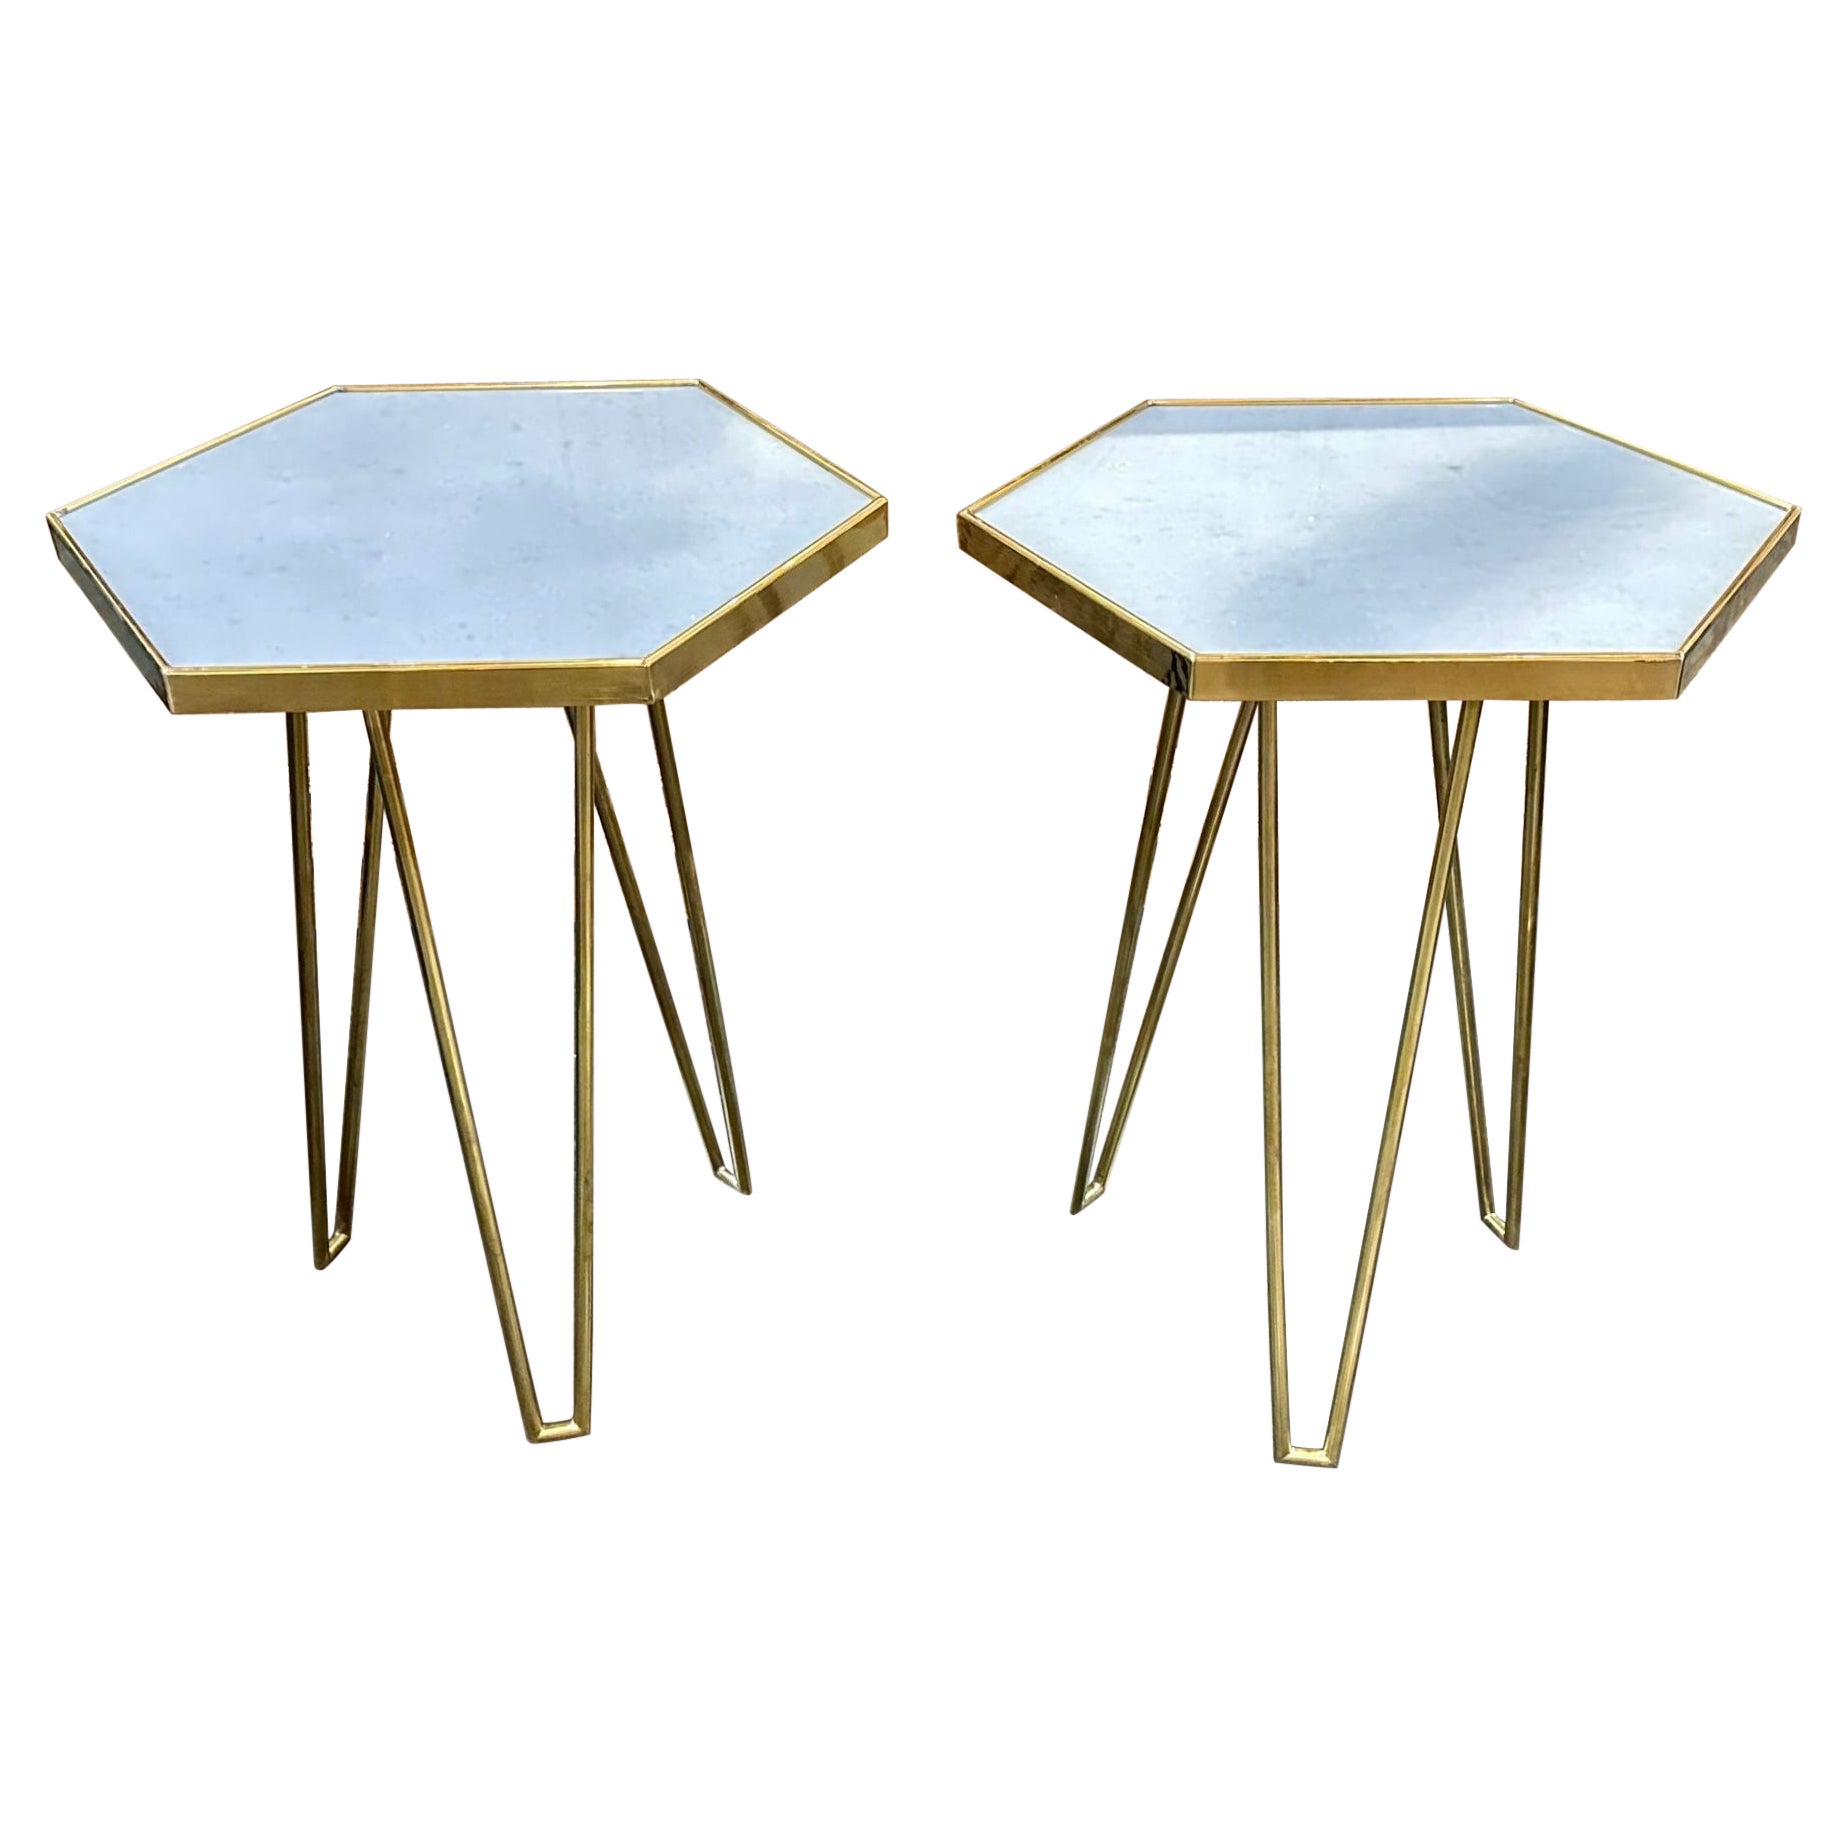 Pair of Italian Brass and Marble Hex Form Tables